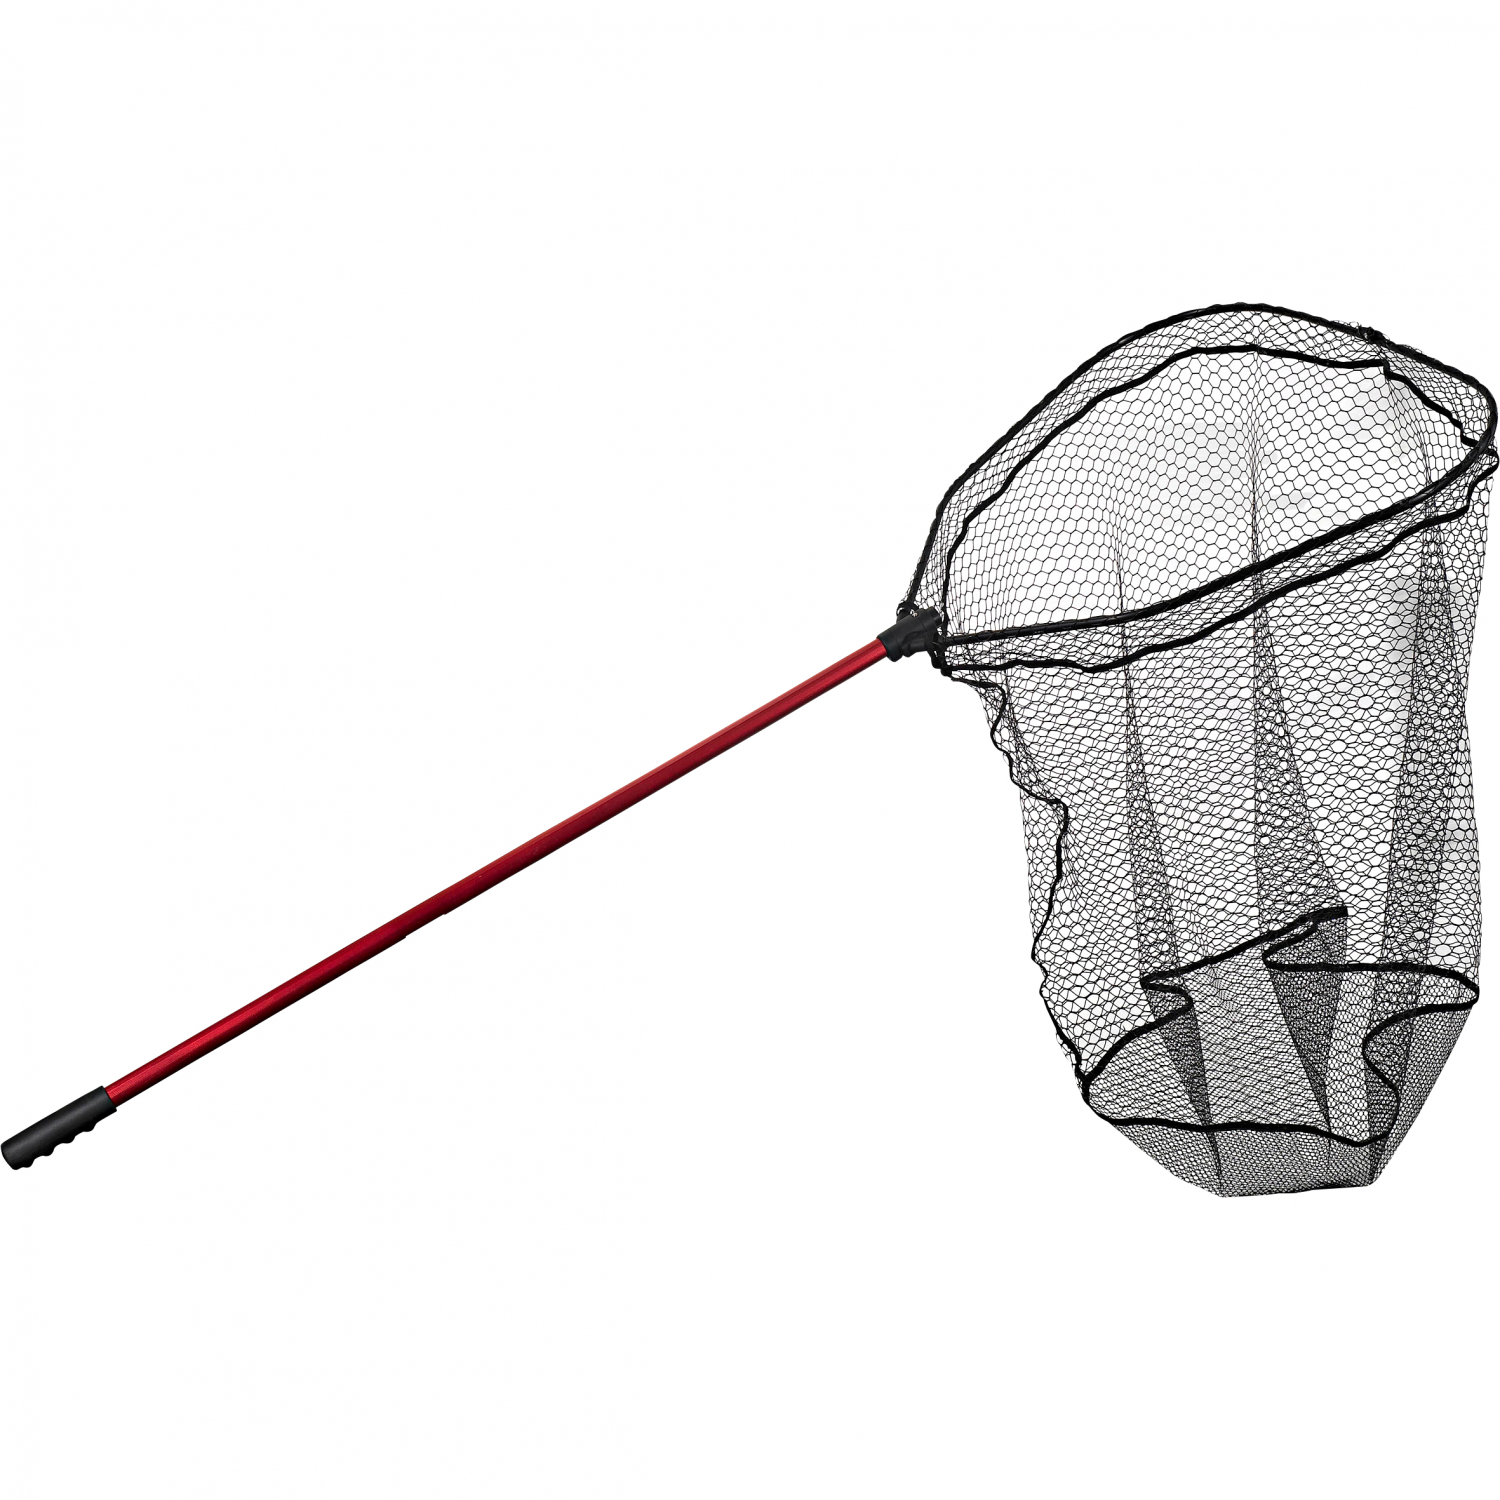 Iron Claw Landing net Folded Mag Scoop at low prices